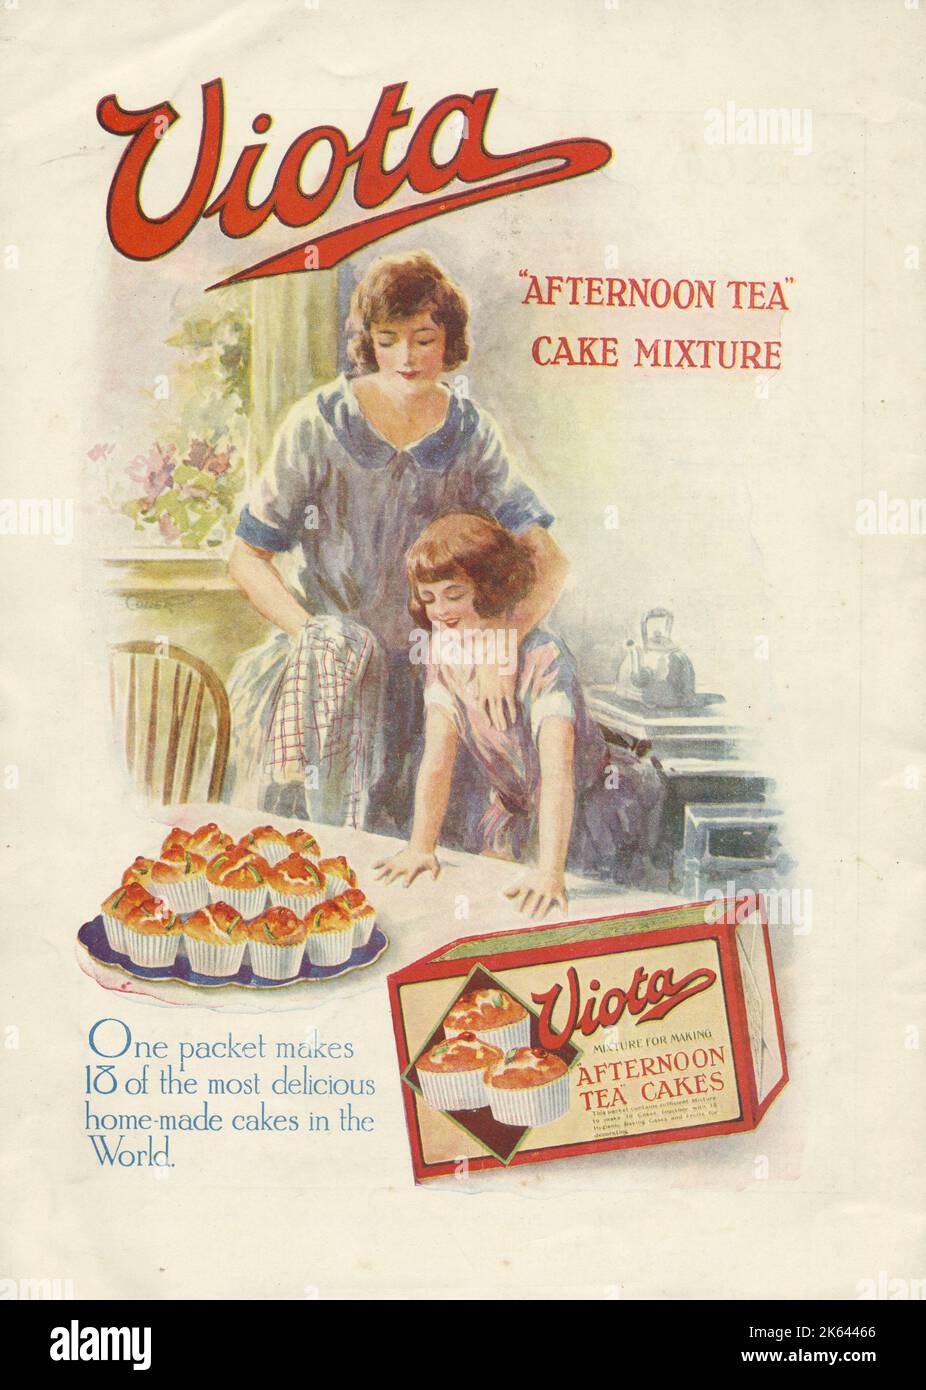 Advertisement for Viota 'Afternoon Tea' cake mixture, 'one packet makes 18 of the most delicious home-made cakes in the world.' Stock Photo